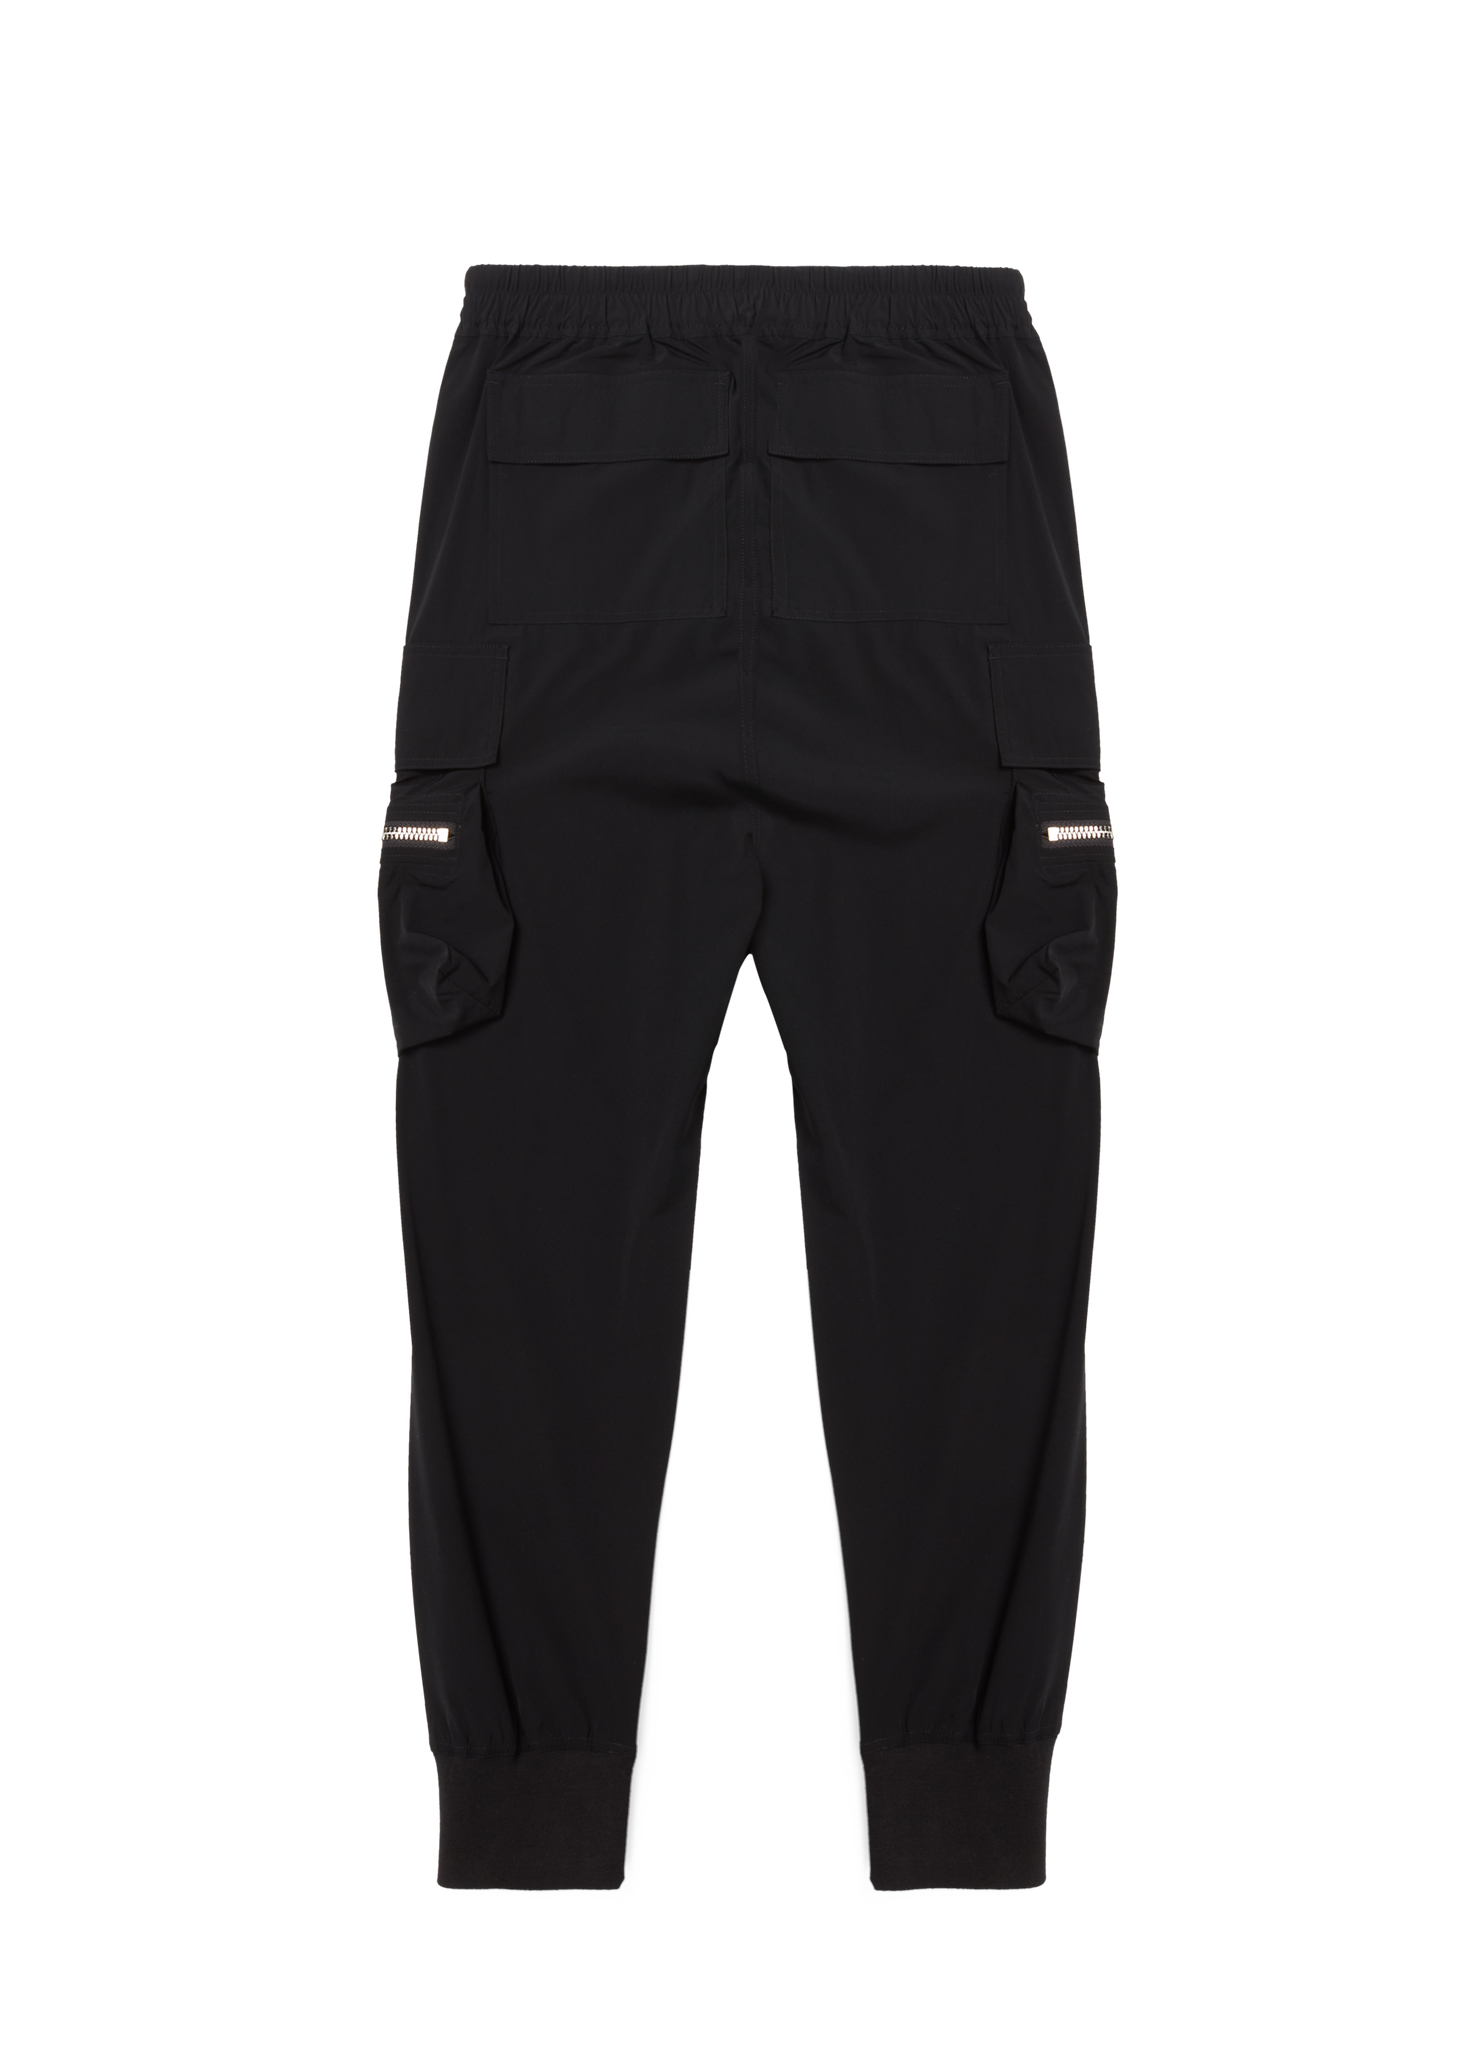 NEW ALO CARGO JOGGER in Black - Size S #1166